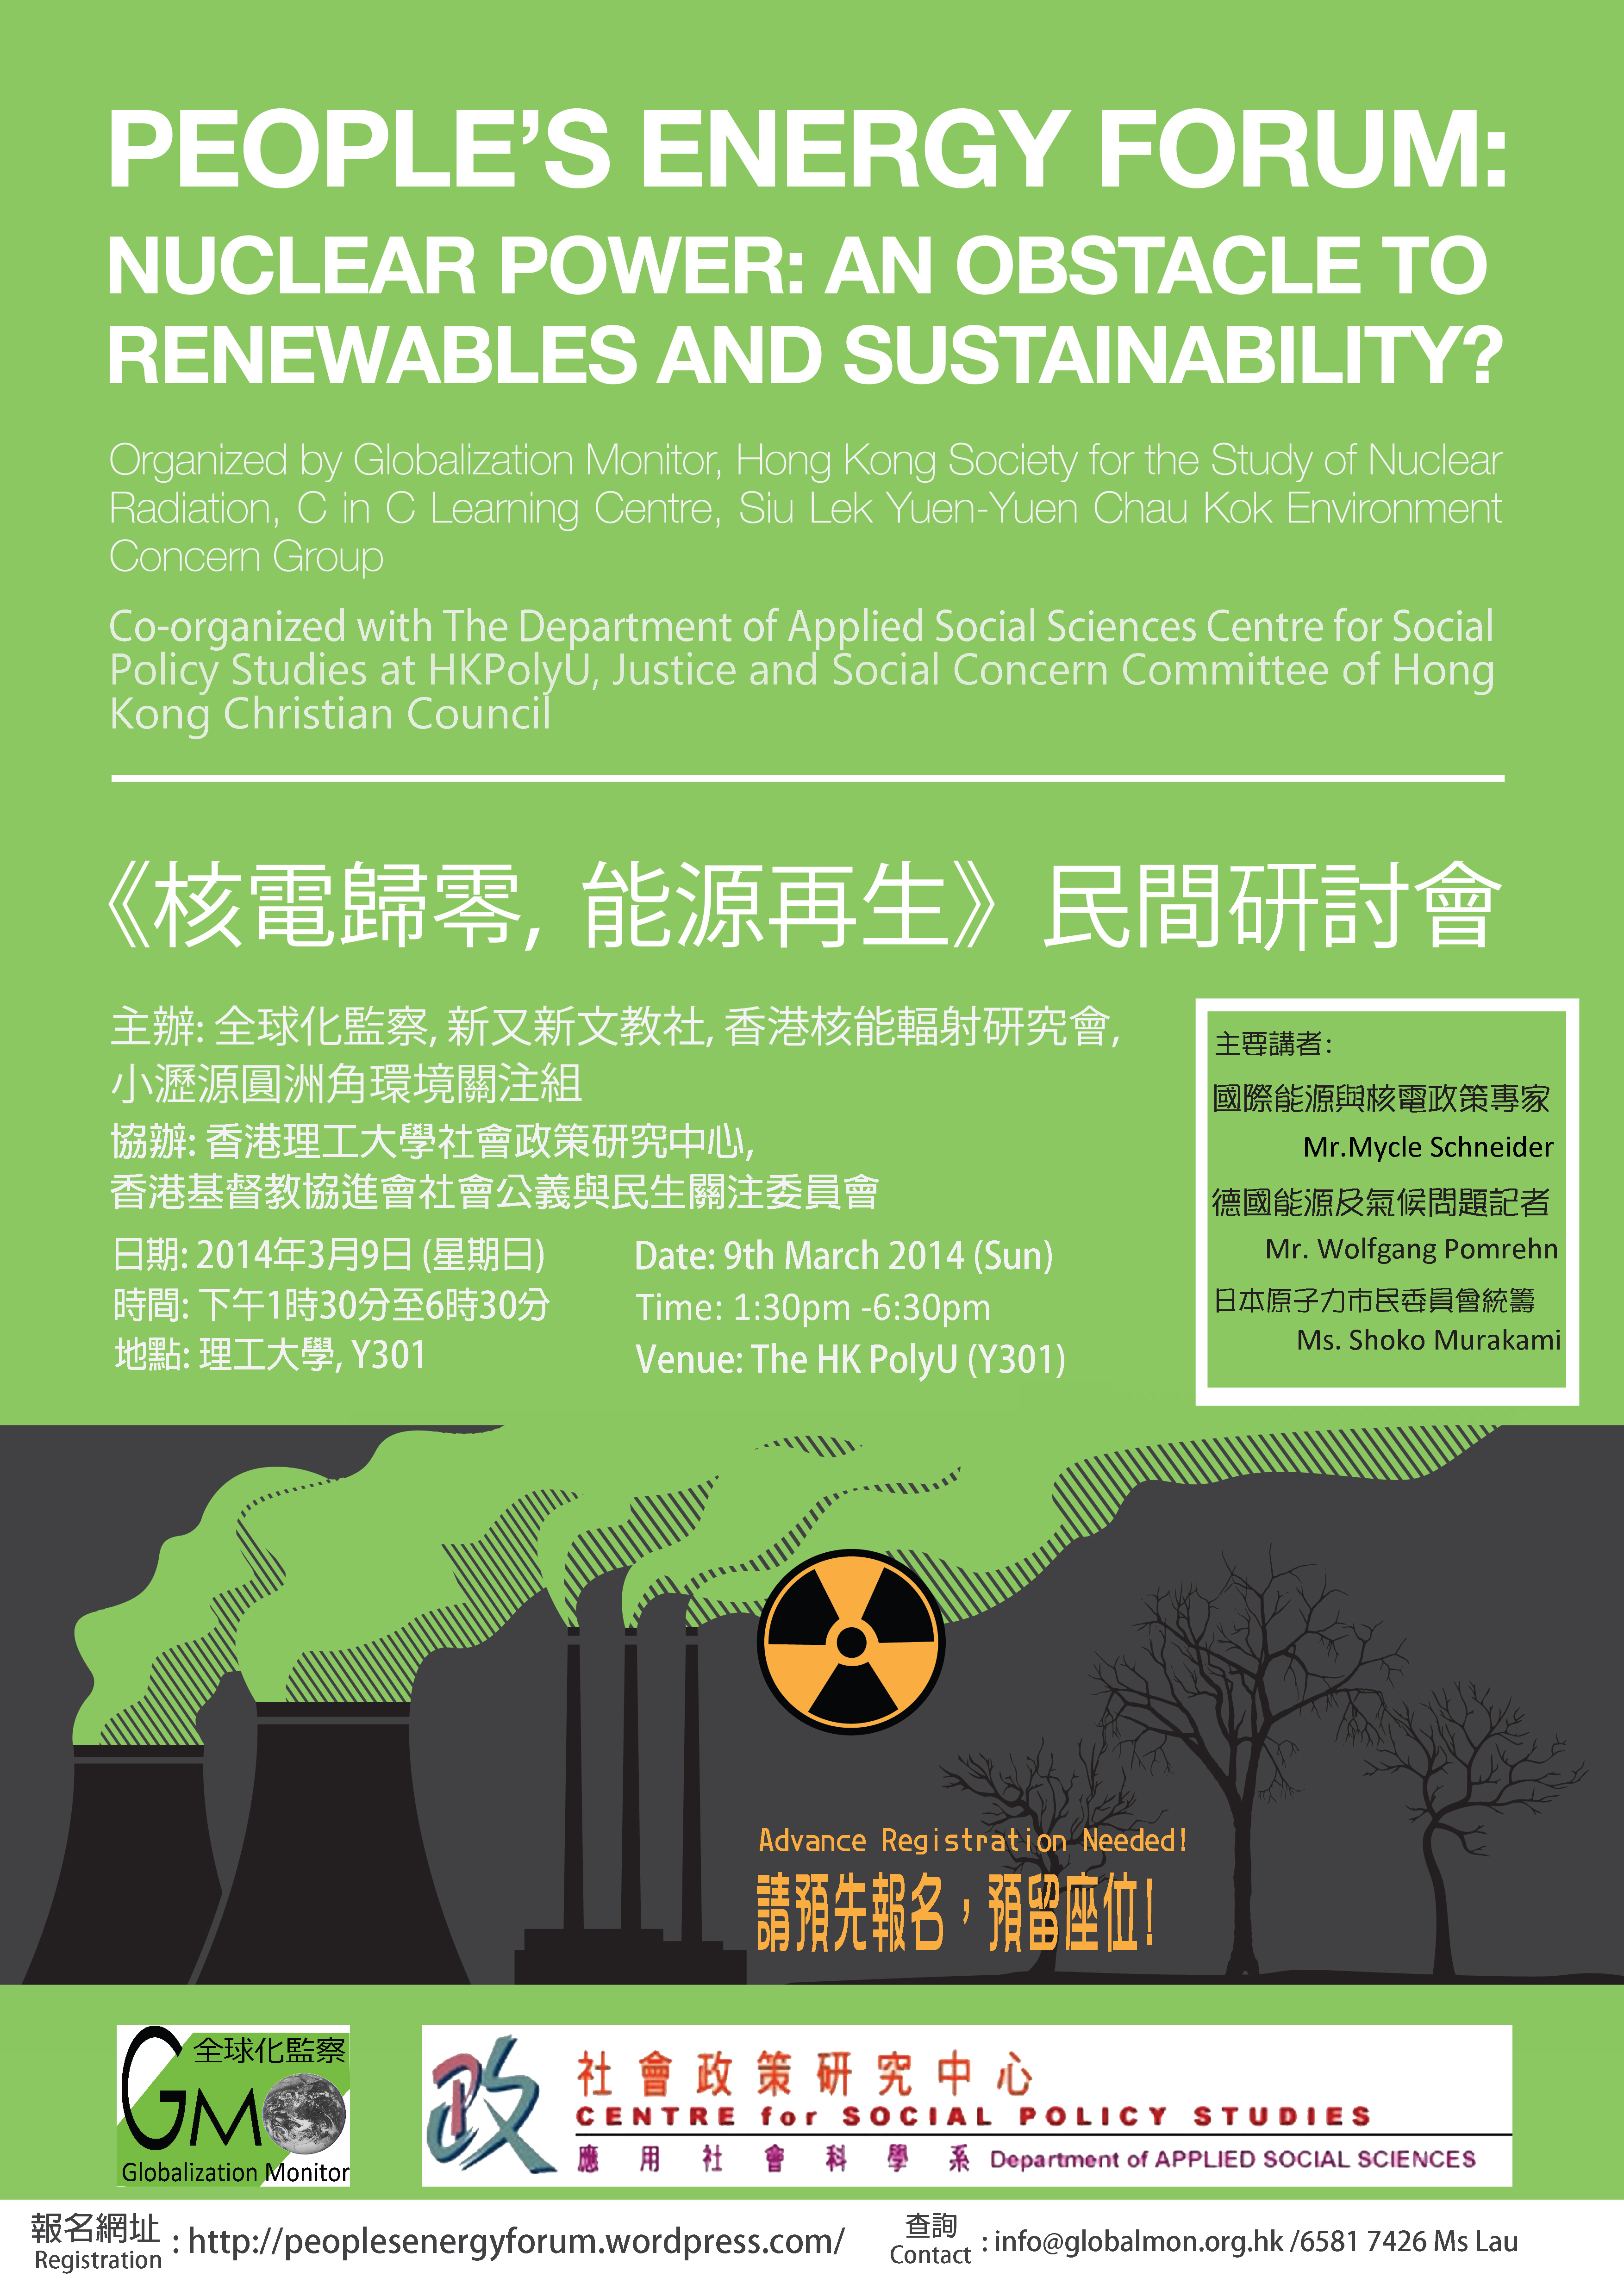 People’s Energy Forum: Nuclear Power: an Obstacle to Renewables and Sustainability?